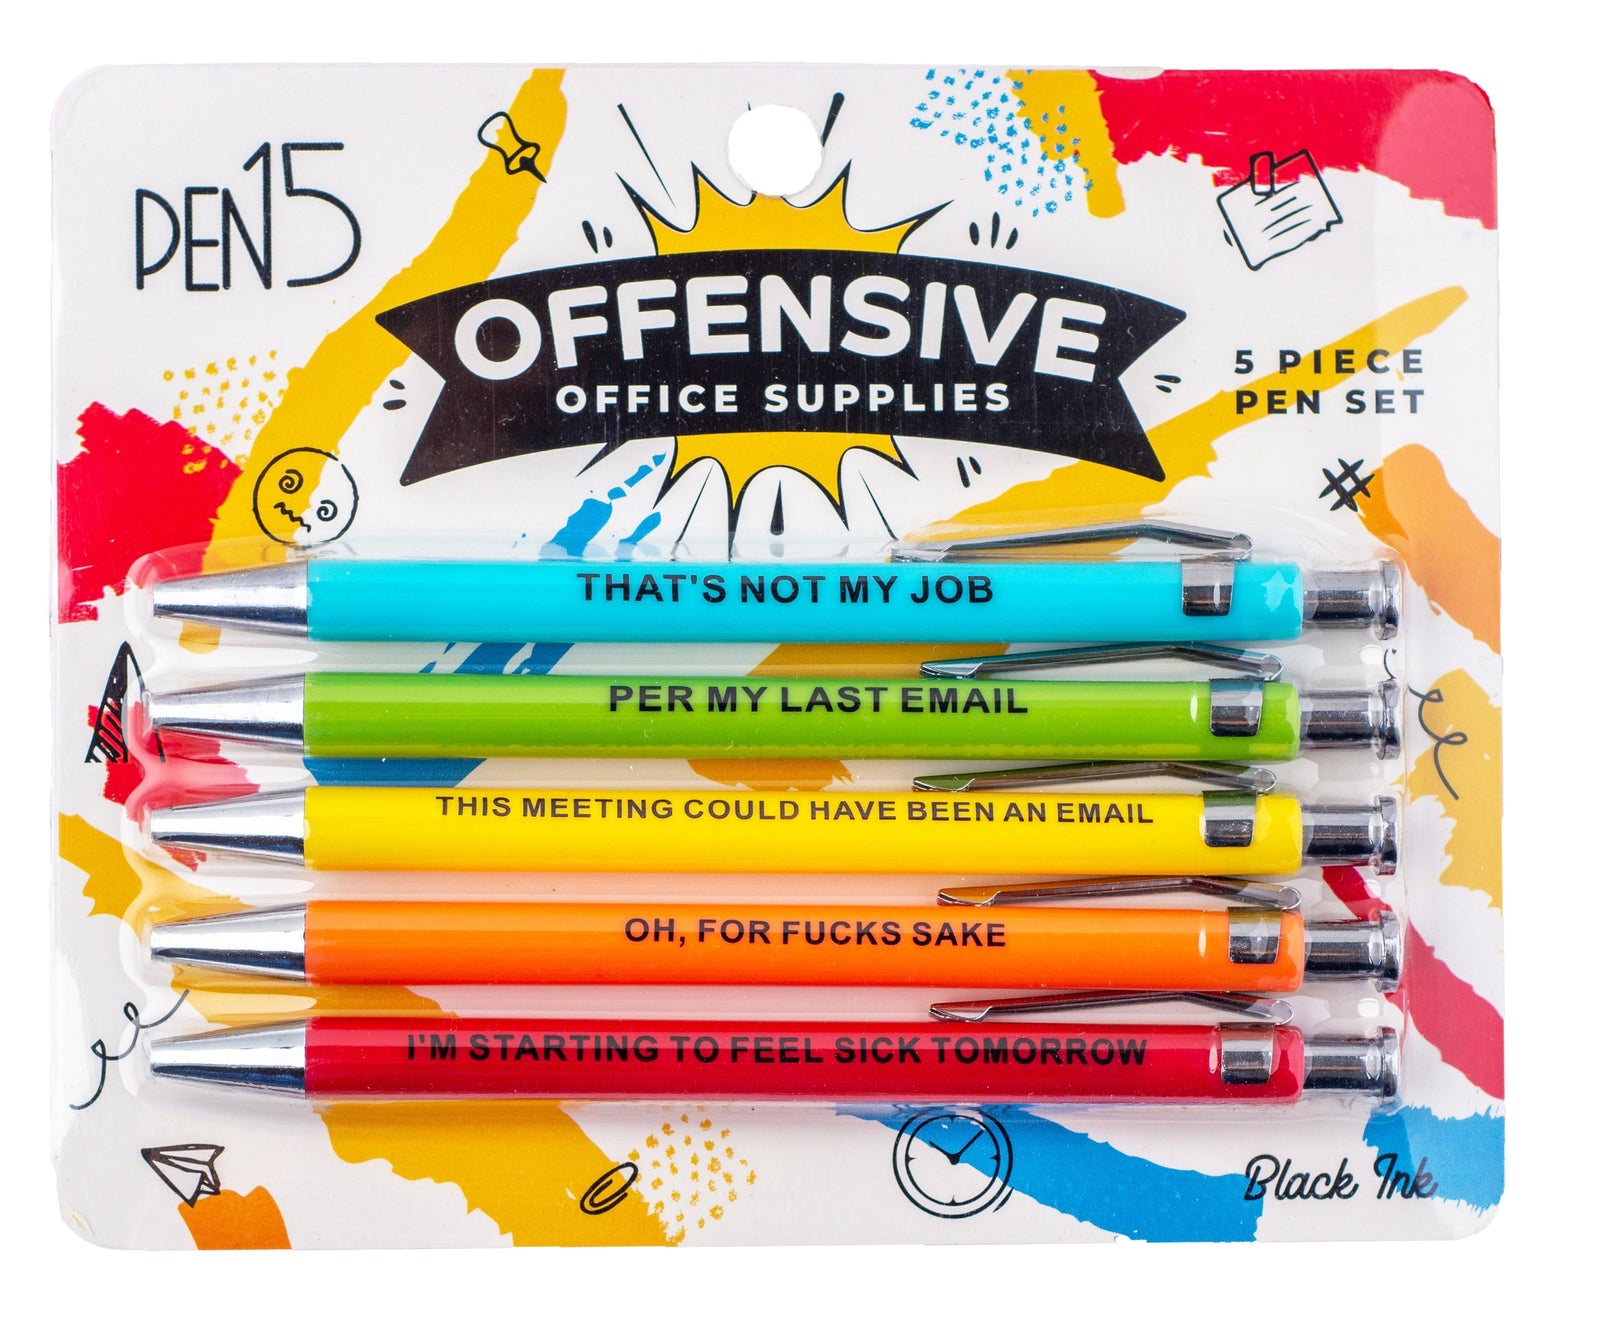  Milktoast Brands Adult offensive crayons, a funny gag